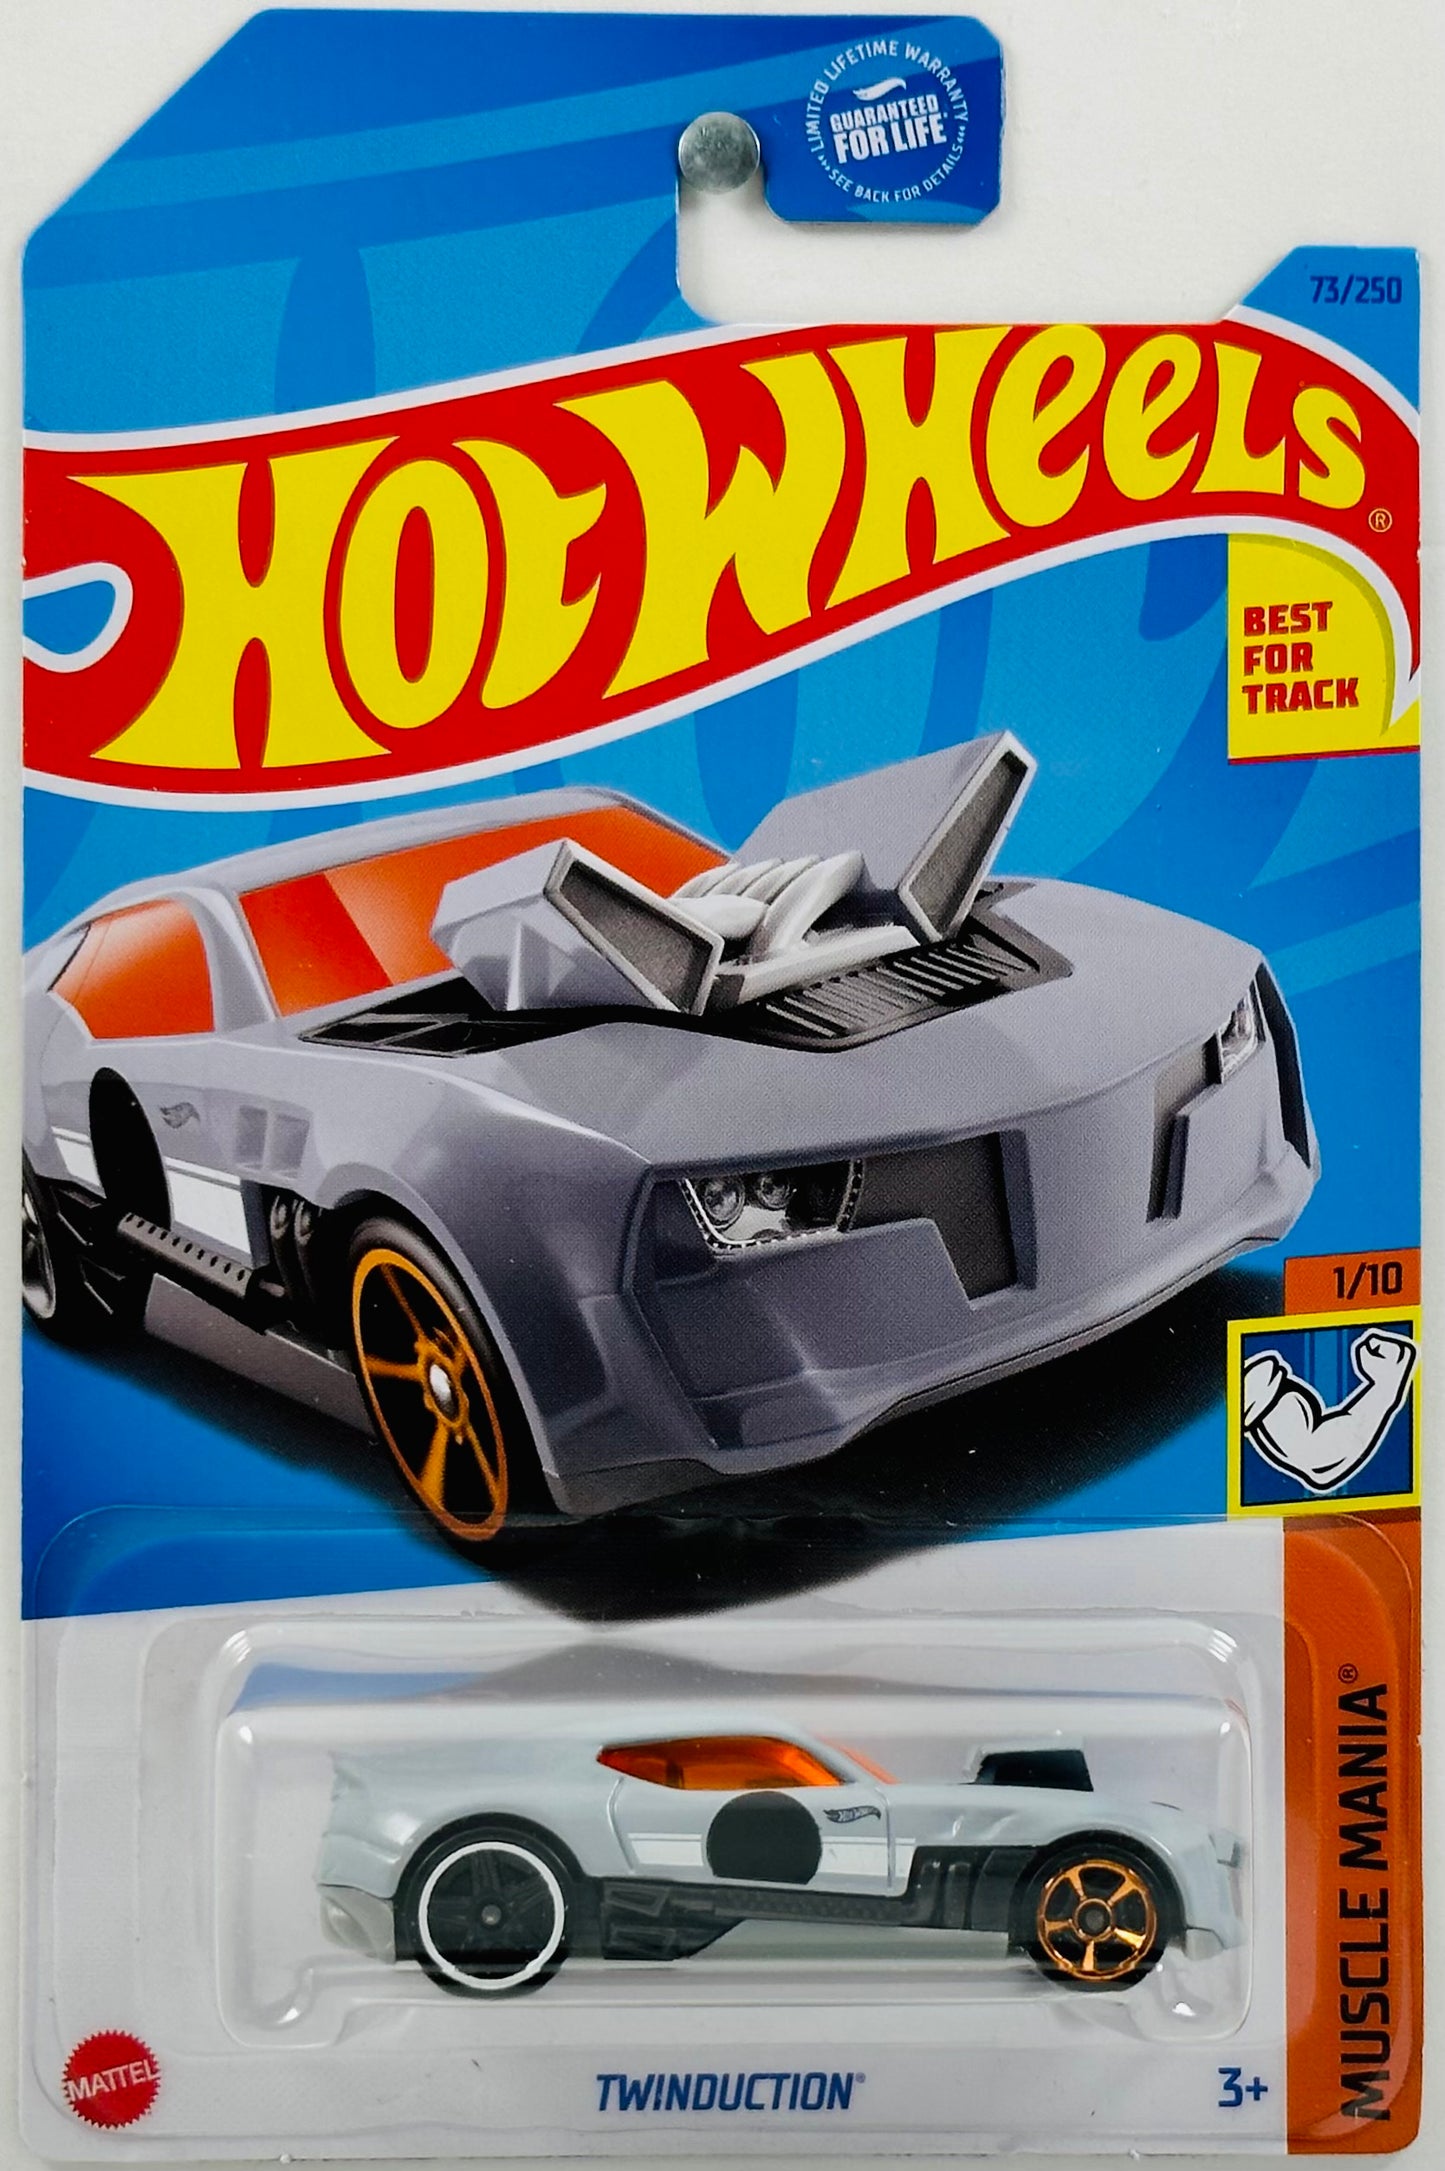 Hot Wheels 2023 - Collector # 073/250 - Muscle Mania 01/10 - Twinduction - Gray - White Stripe / Black Circle - Best for Track - USA